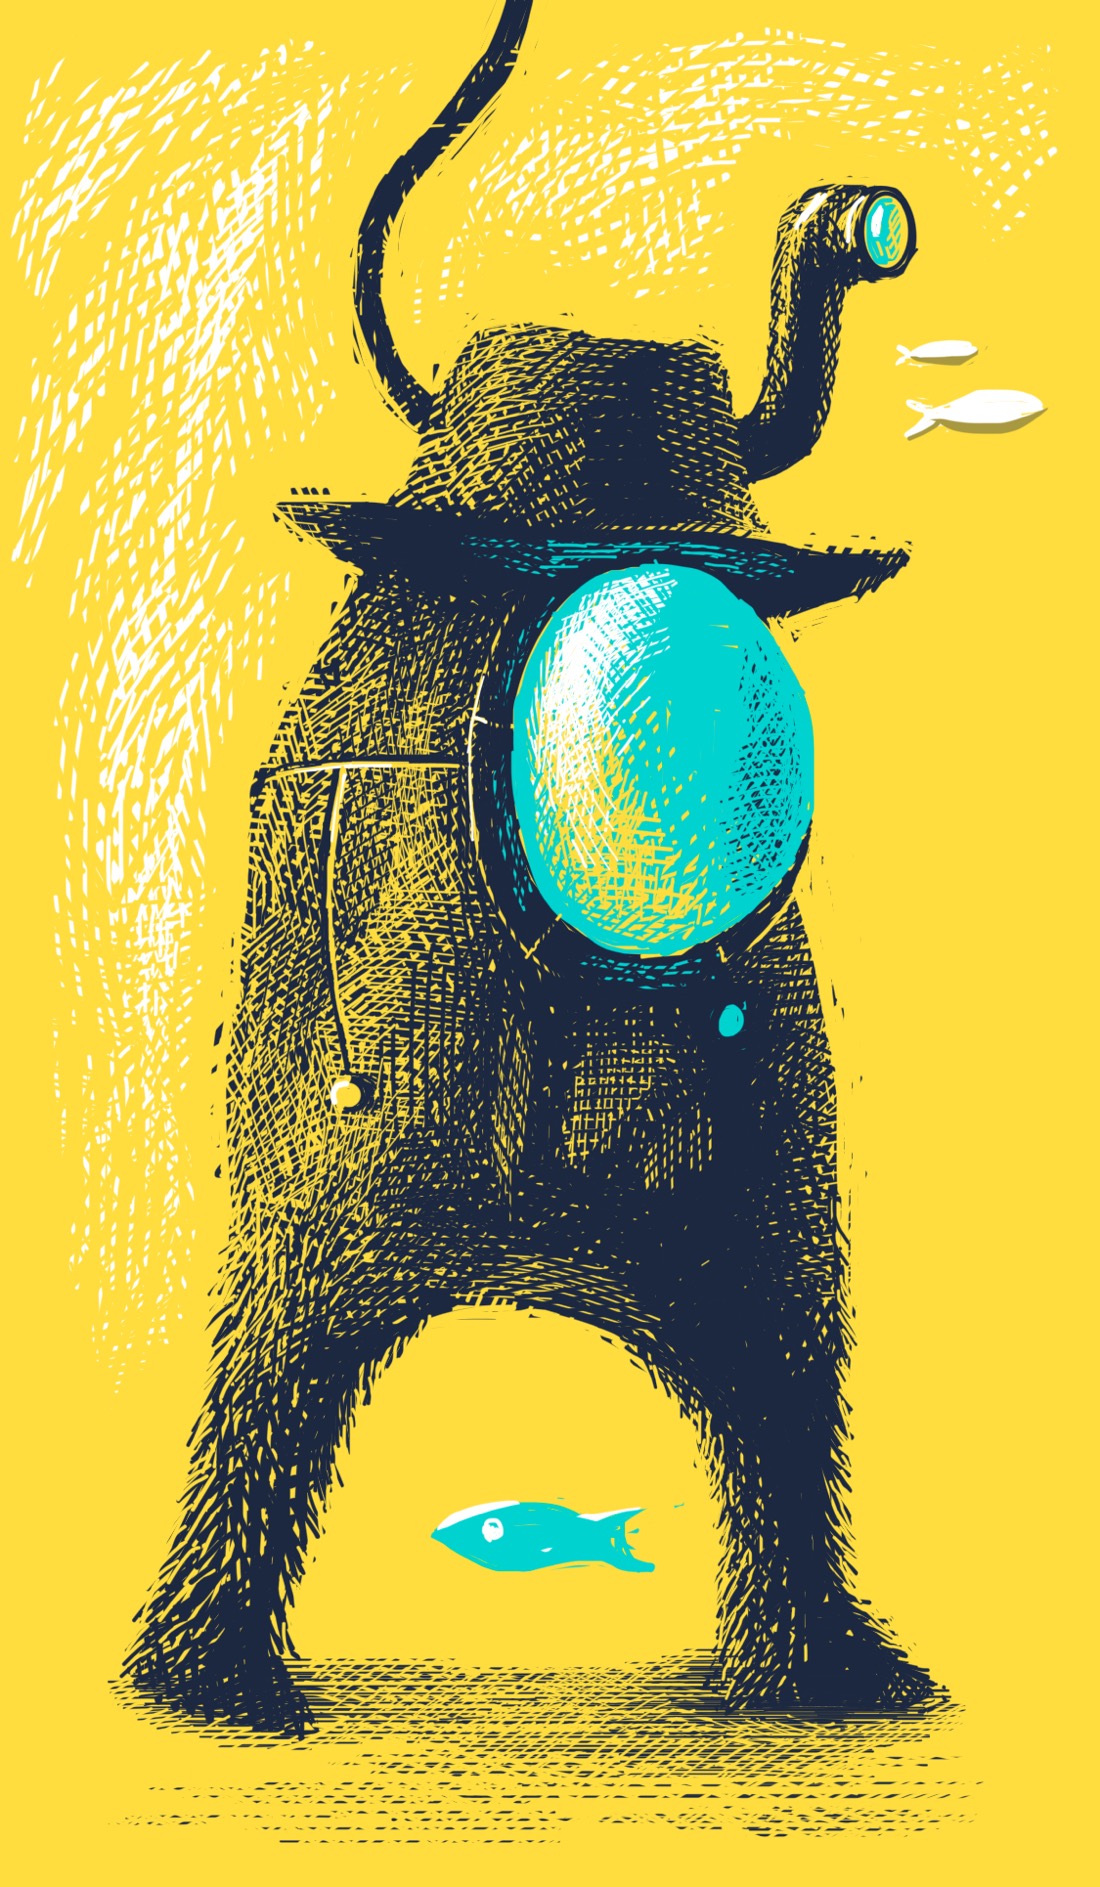 Someone wearing a very unique diving suit walks on the ocean floor. The suit has furry pant legs, a giant blue glass sphere for a faceplate, and a fedora, because one doesn't relinquish one's fashion sensibilities simply because one is at the bottom of the sea. The suit is connected to something by a black hose extending off the top of the screen. There are fish swimming near the figure.